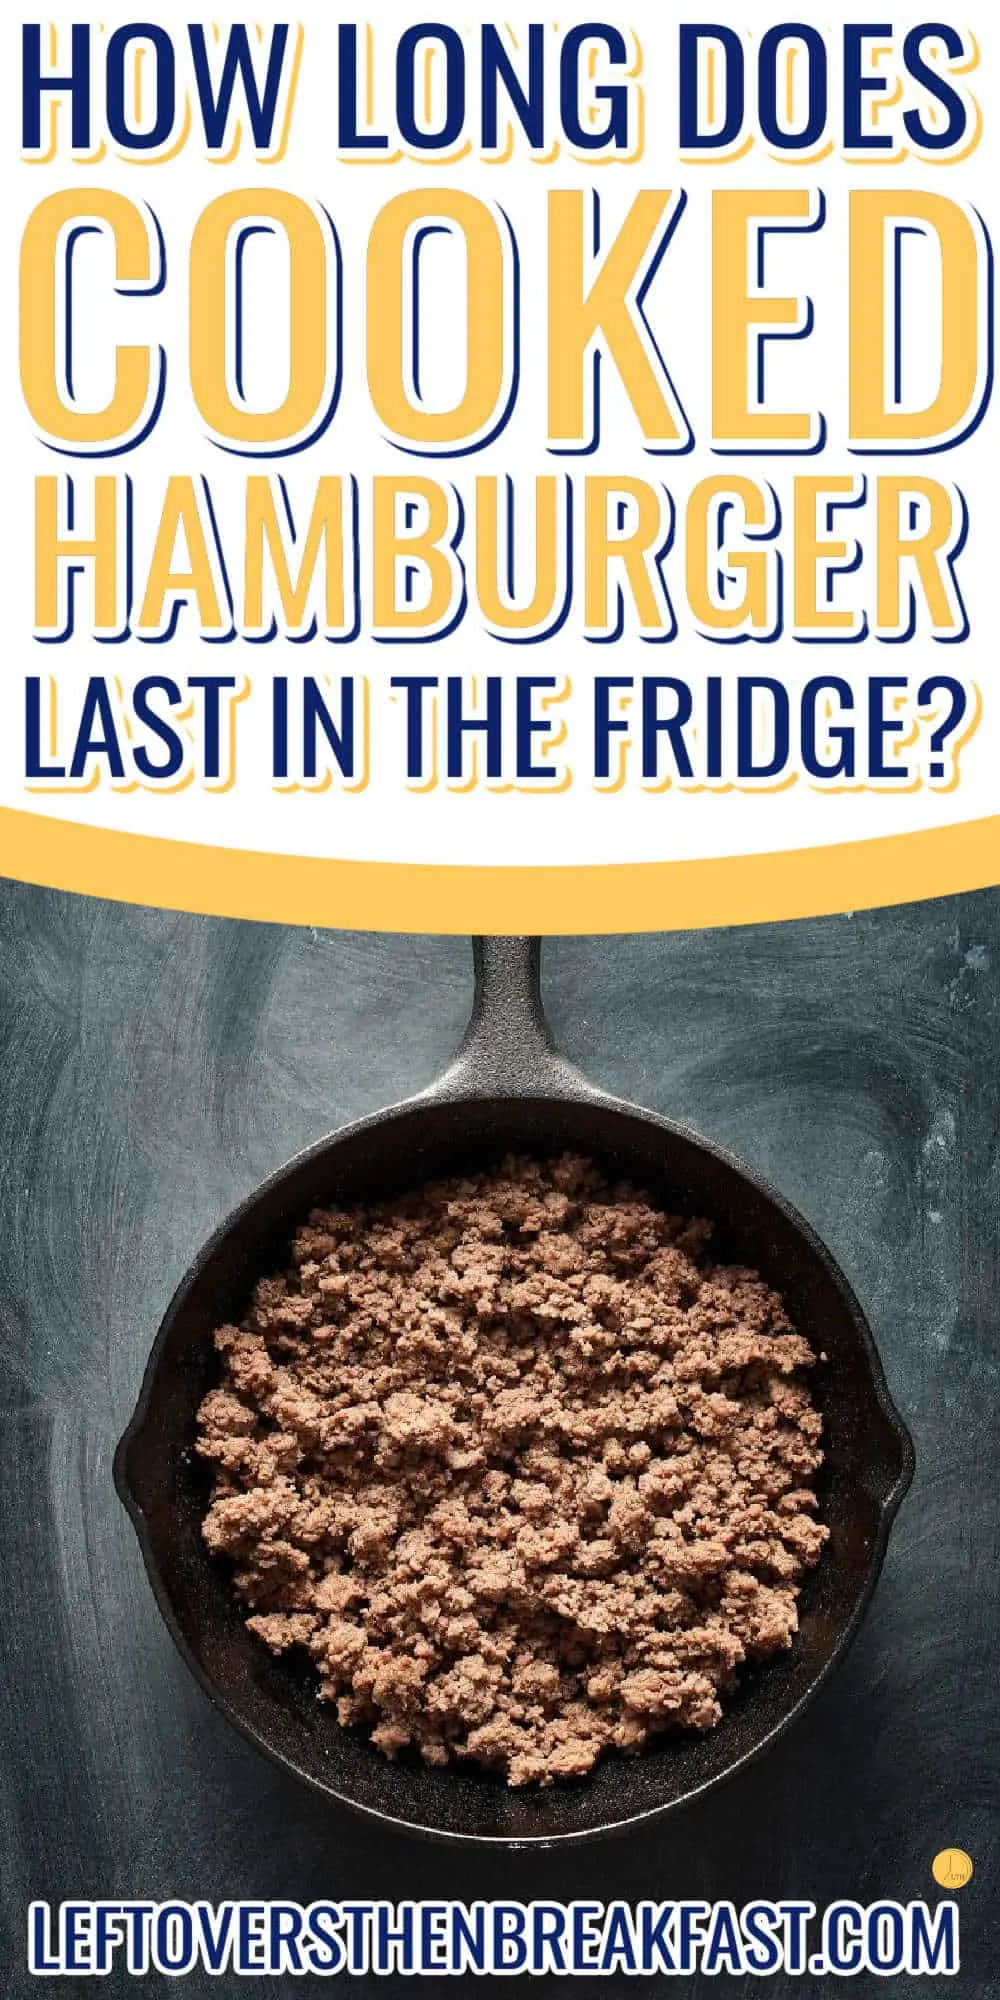 skillet of cooked hamburger with white banner and yellow text